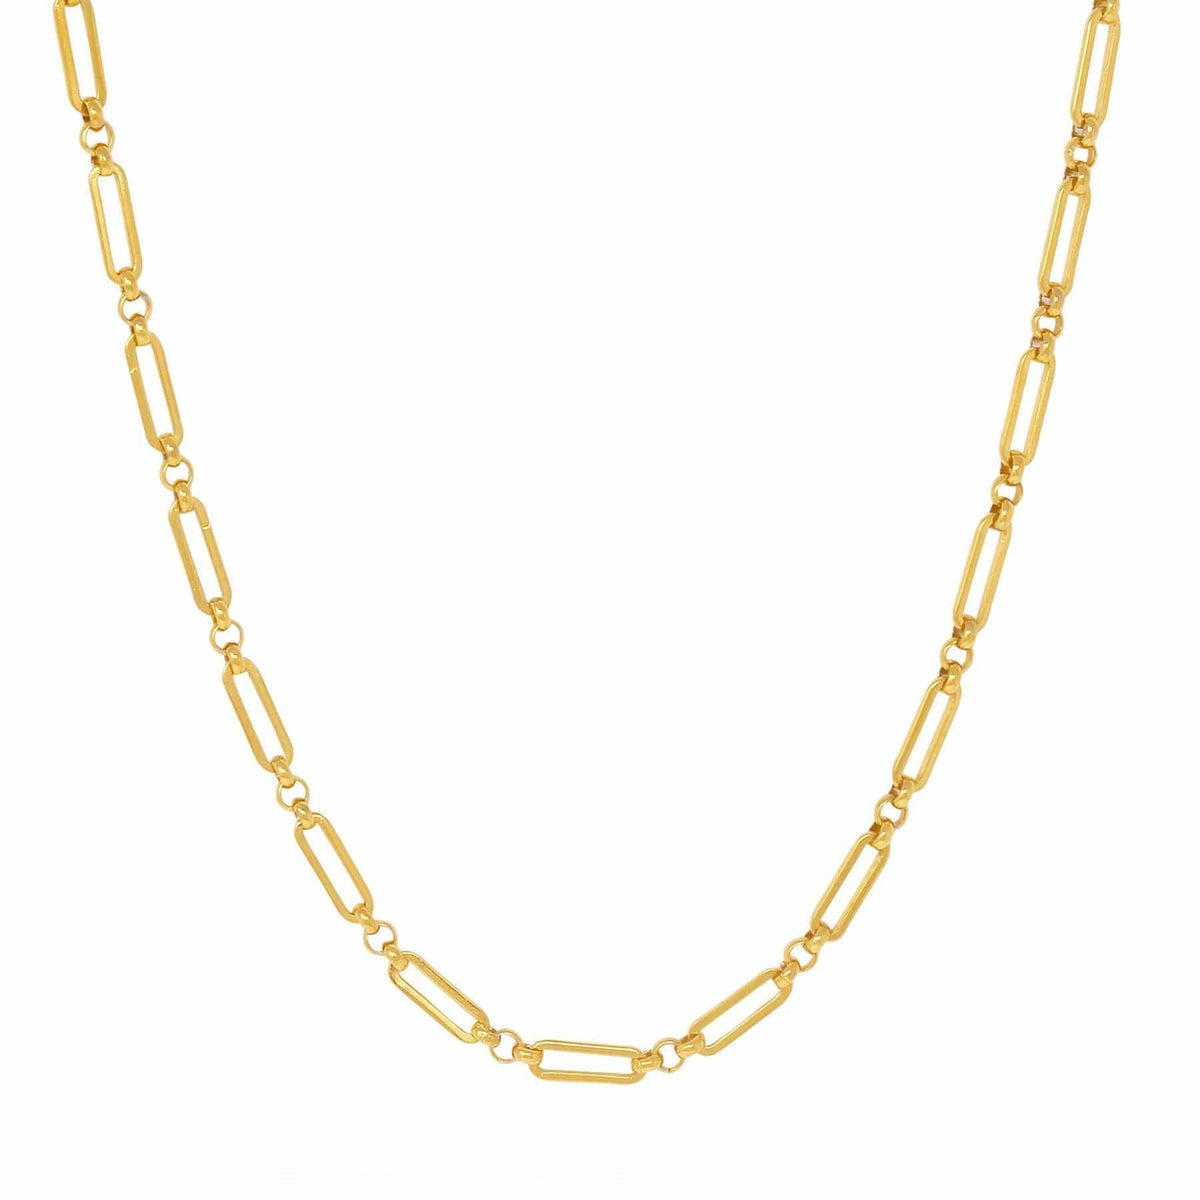 BohoMoon Stainless Steel Axel Chain Choker / Necklace Gold / Choker